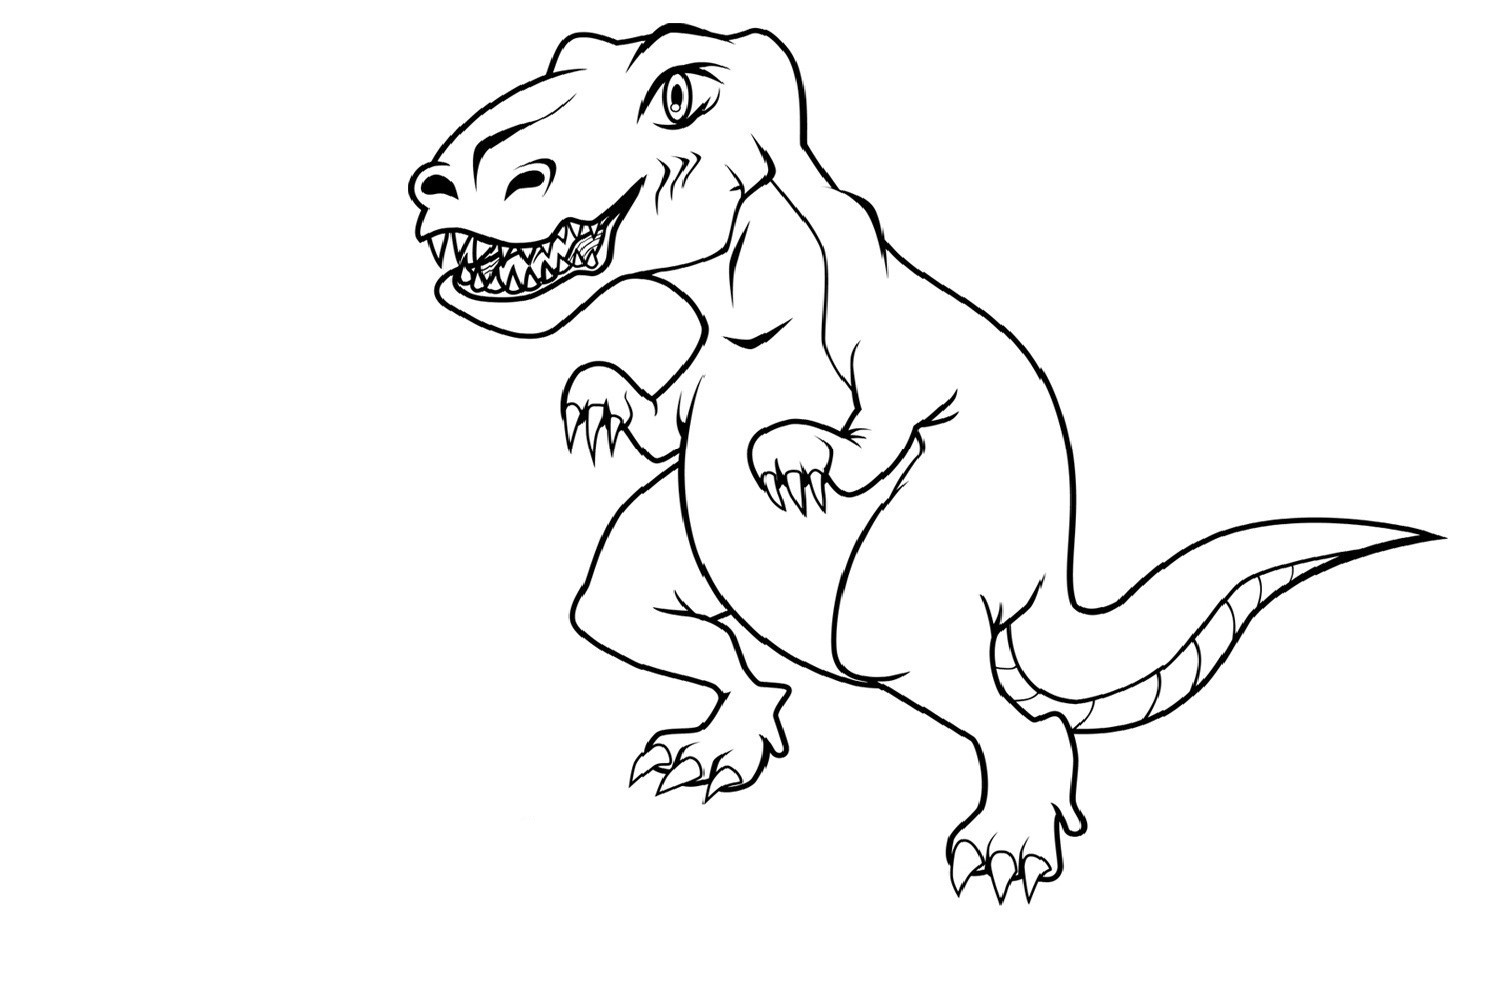 Coloring Pages For Kids Dinosaur
 Free Printable Dinosaur Coloring Pages For Kids